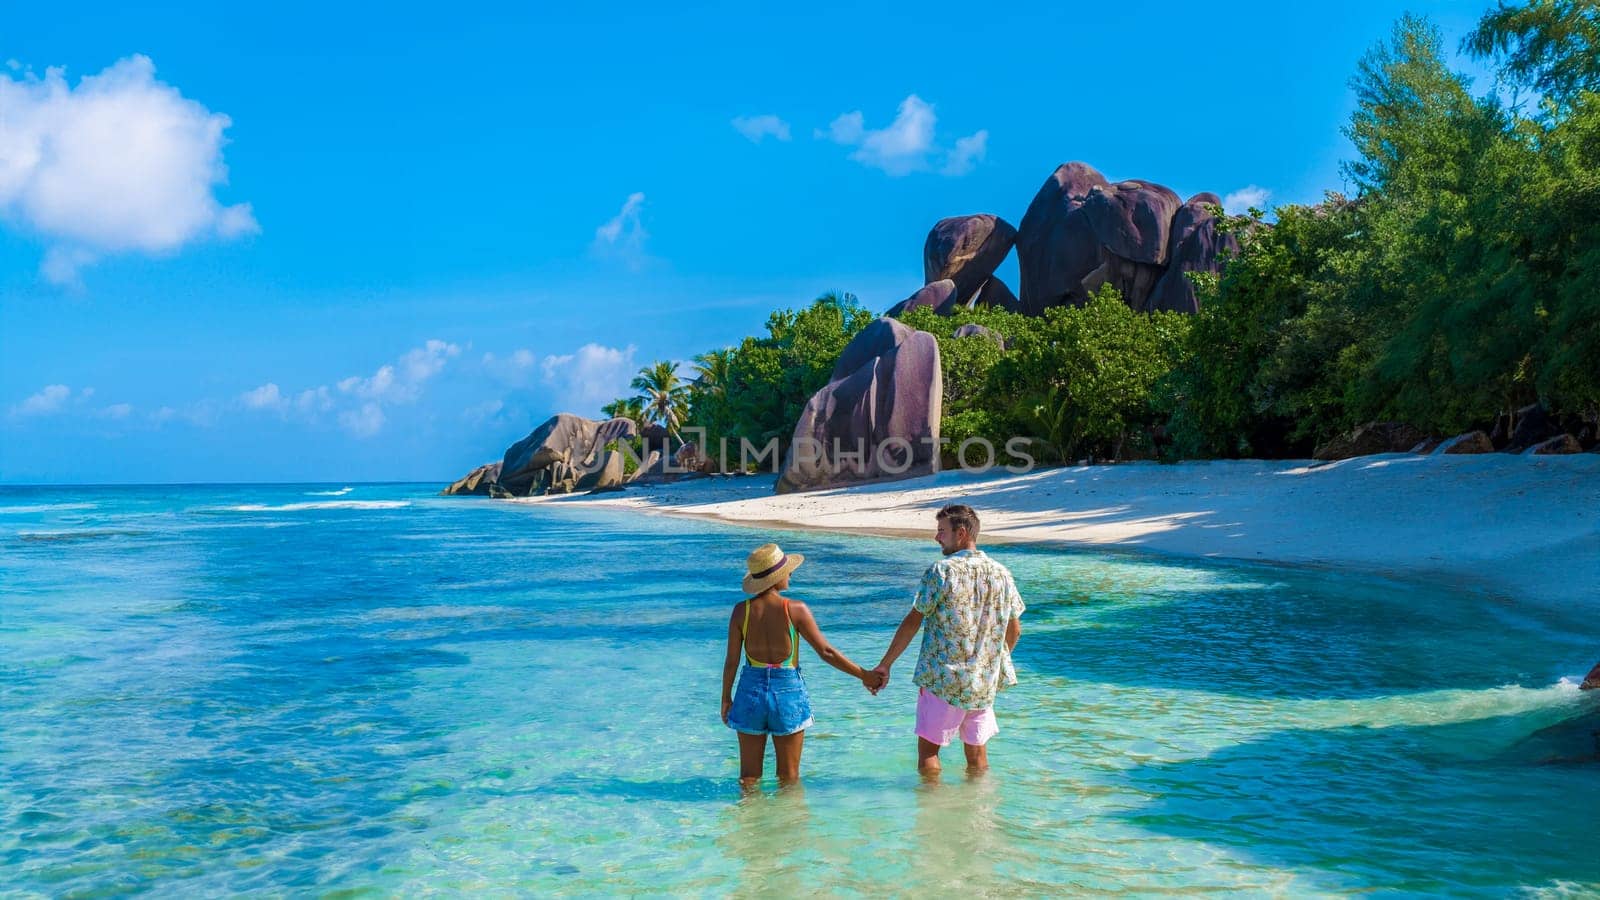 Anse Source d'Argent, La Digue Seychelles, a young couple of men and women on a tropical beach during a luxury vacation in Seychelles.